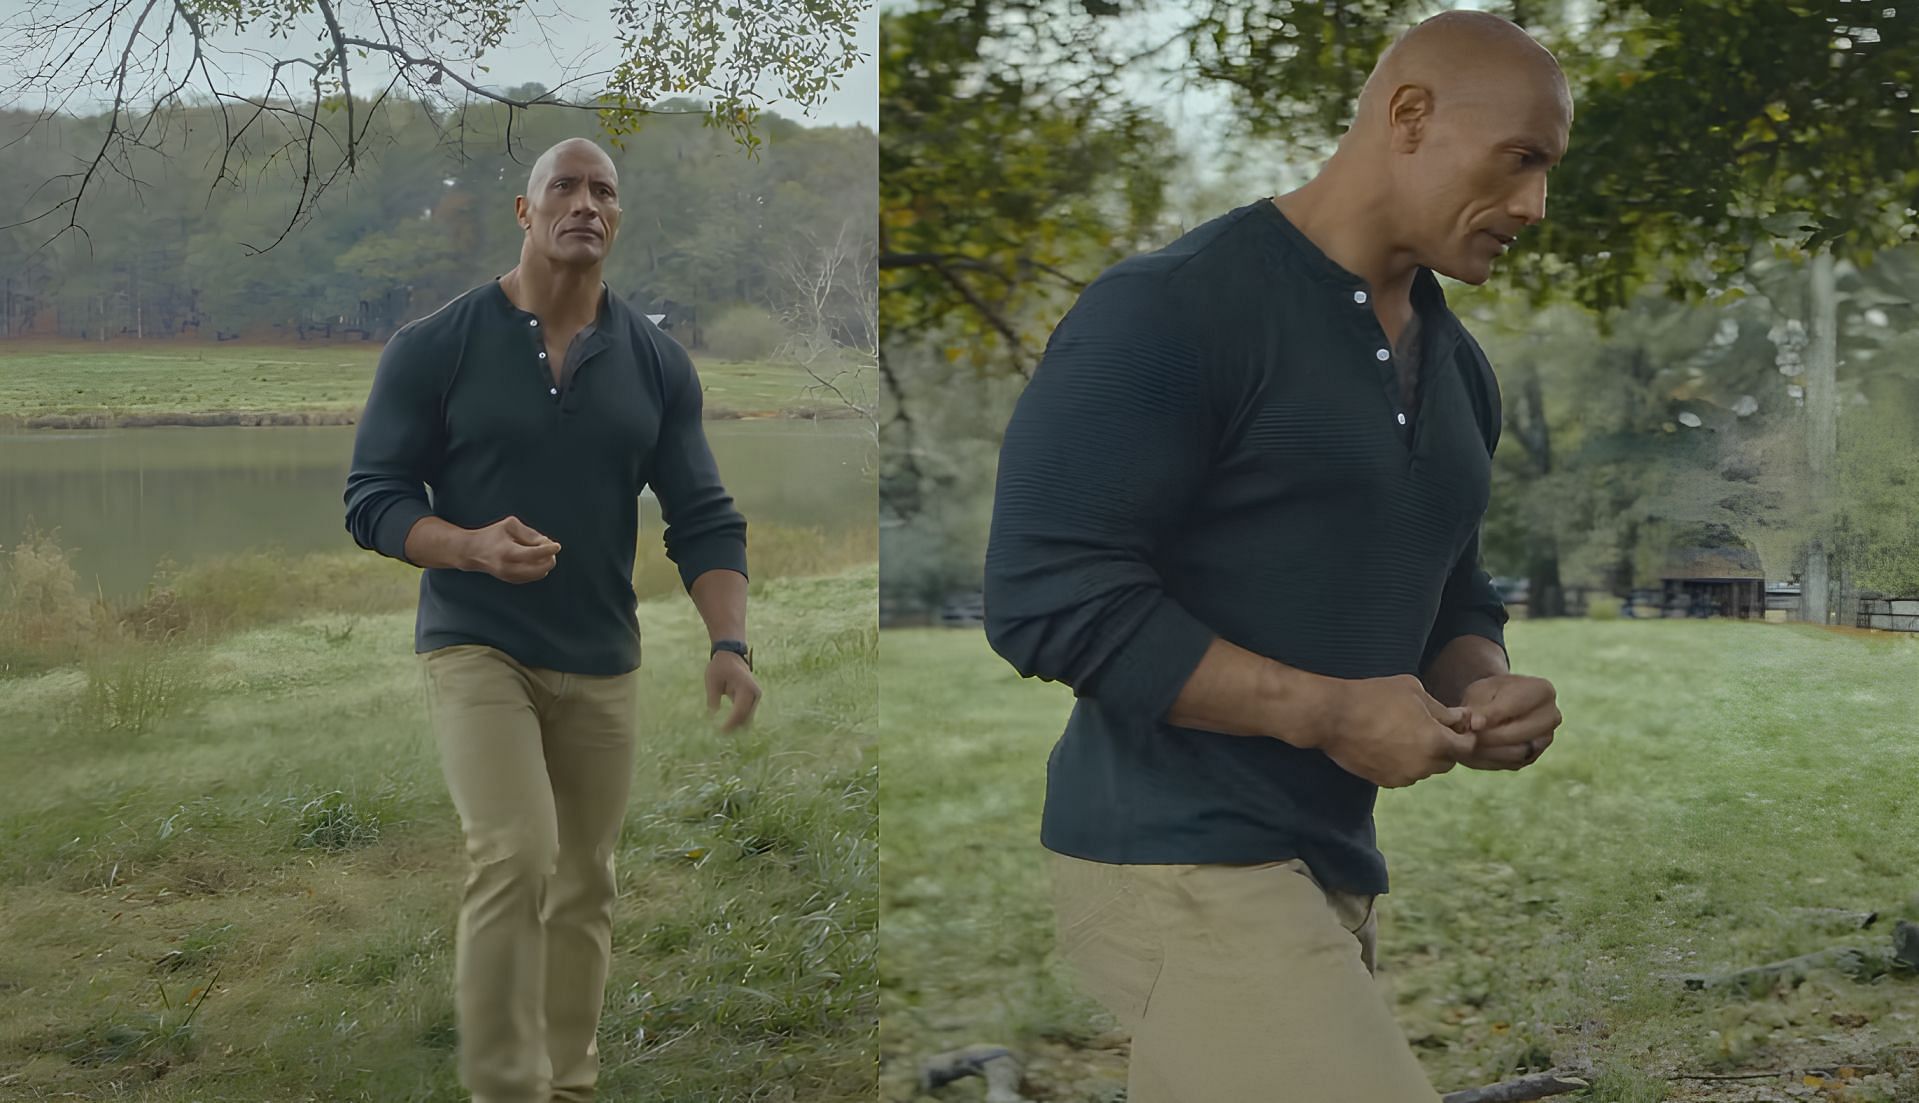 The Rock is a former WWE World Champion 